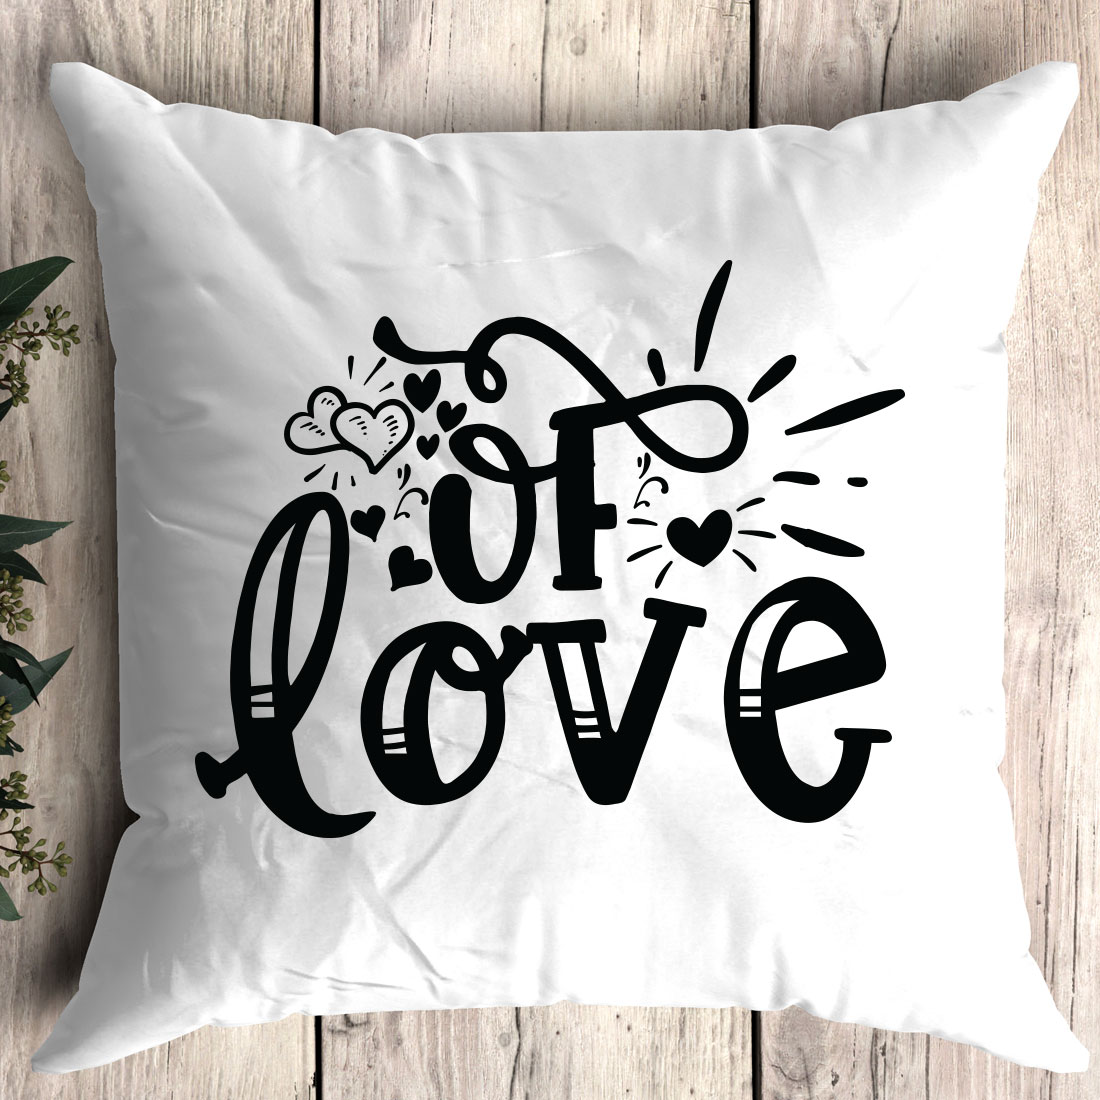 White pillow with the word love printed on it.